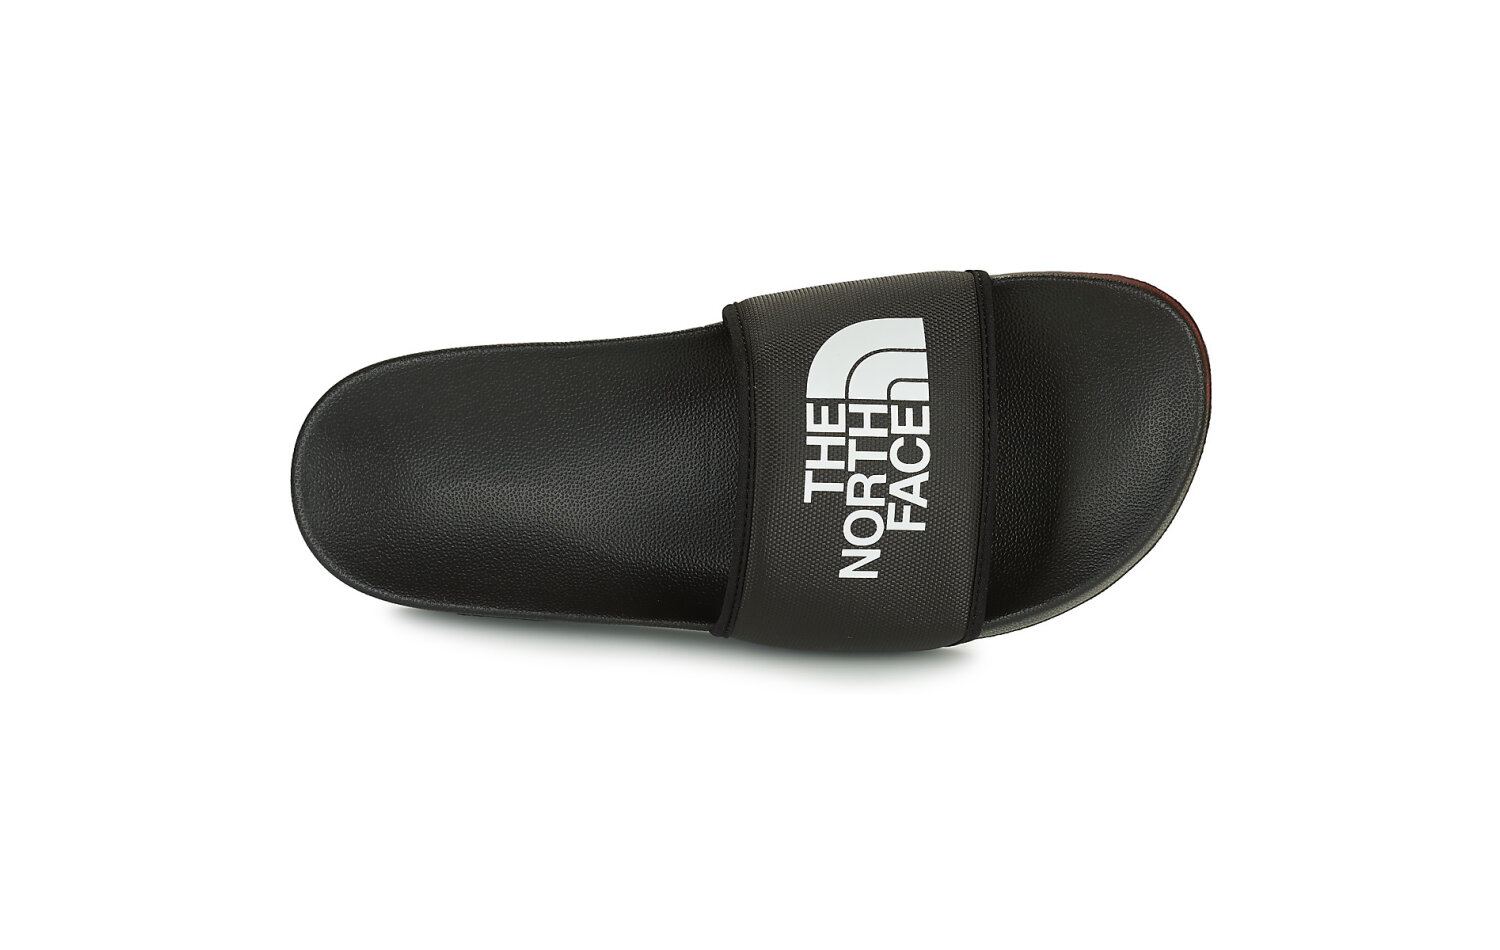 The North Face Base Camp Slide III (NF0A4T2RKY4)